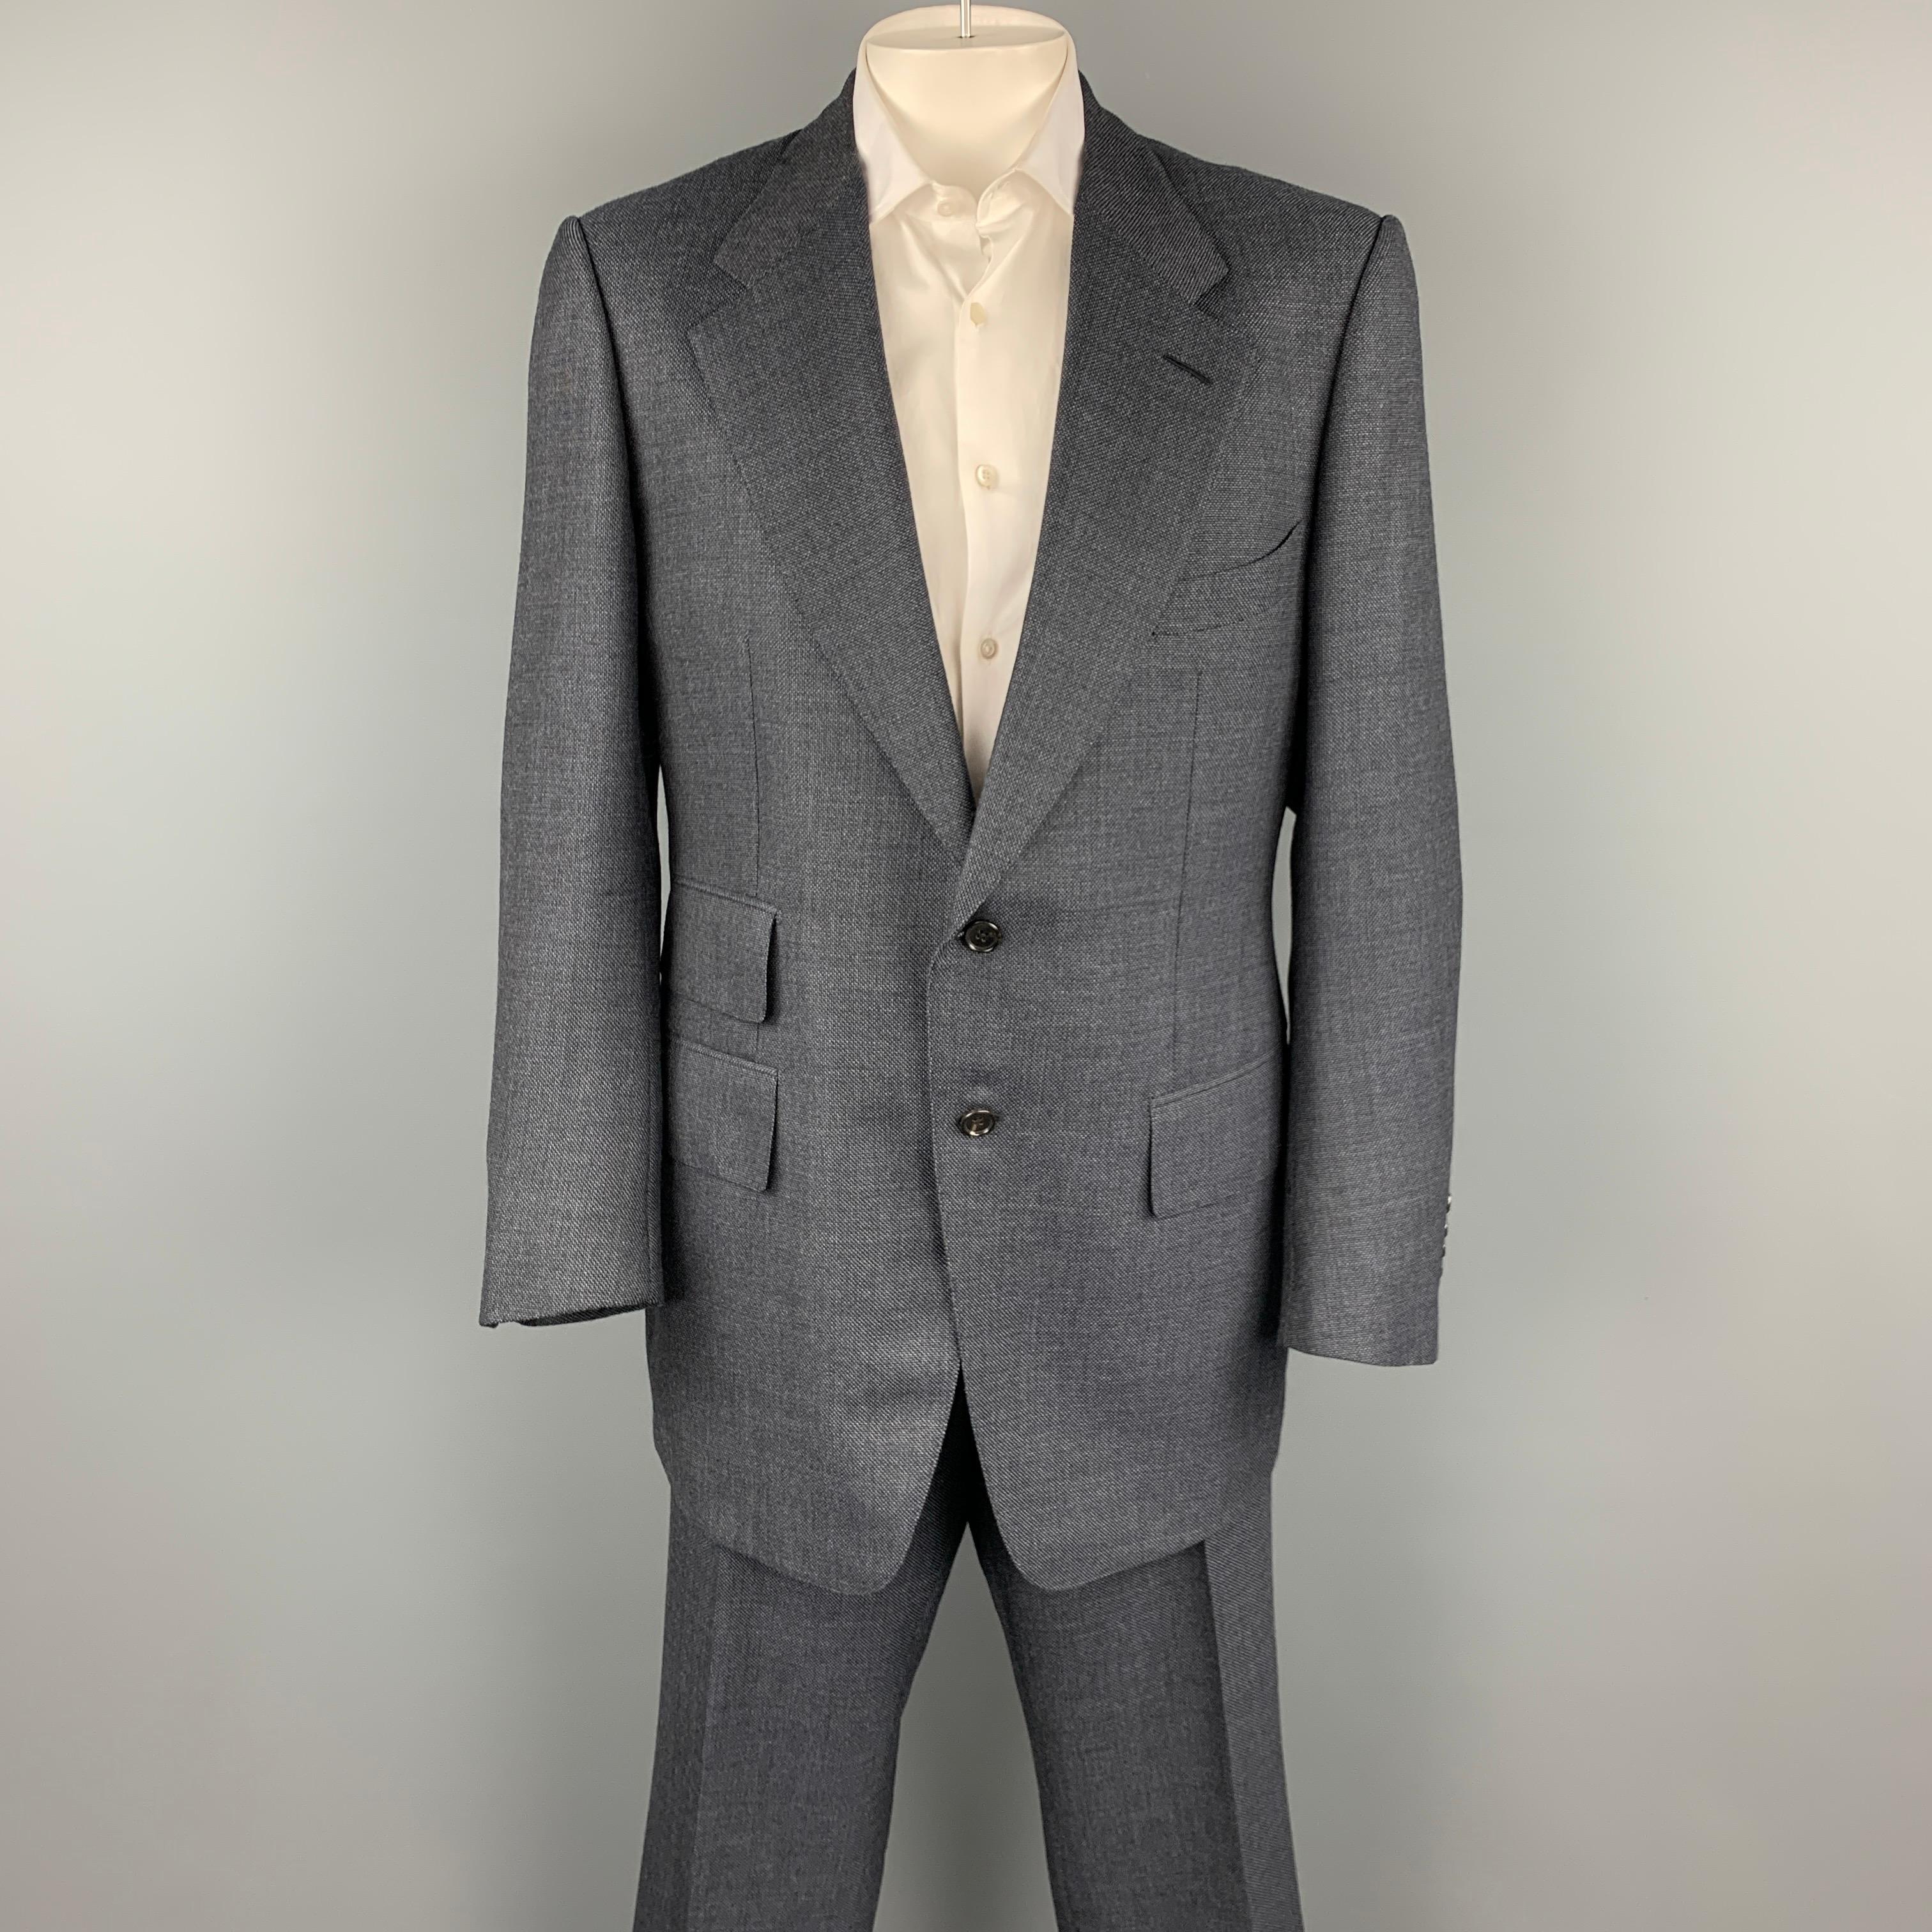 TOM FORD suit comes in a navy wool / silk with a full liner and includes a single breasted, two button sport coat with a notch lapel and matching cuffed flat front trousers.

Very Good Pre-Owned Condition.
Marked: 58